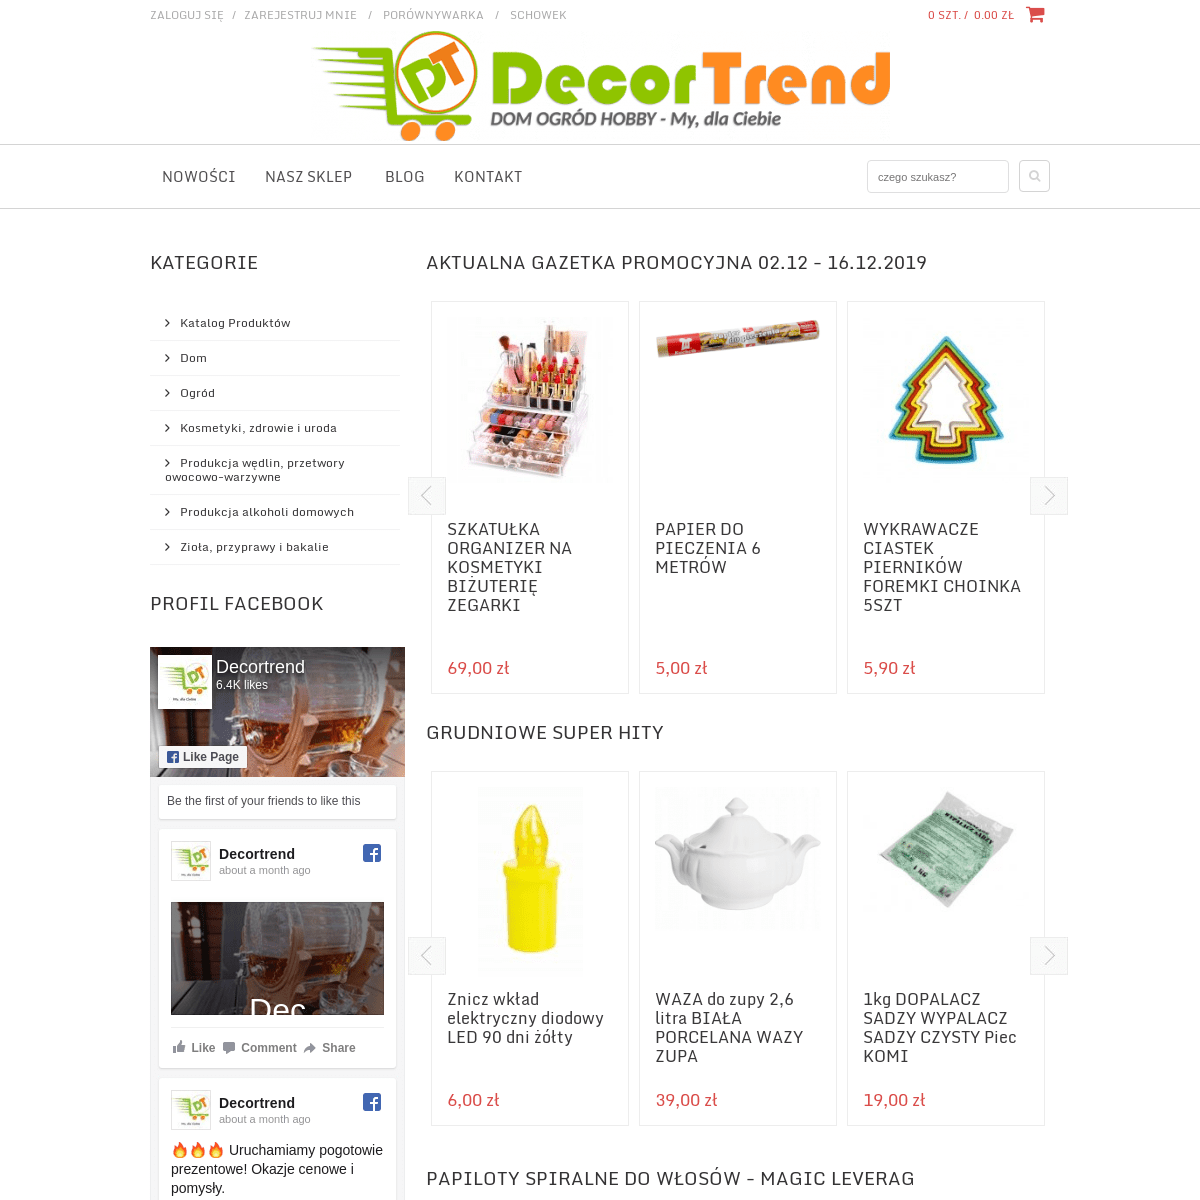 A complete backup of decortrend.pl